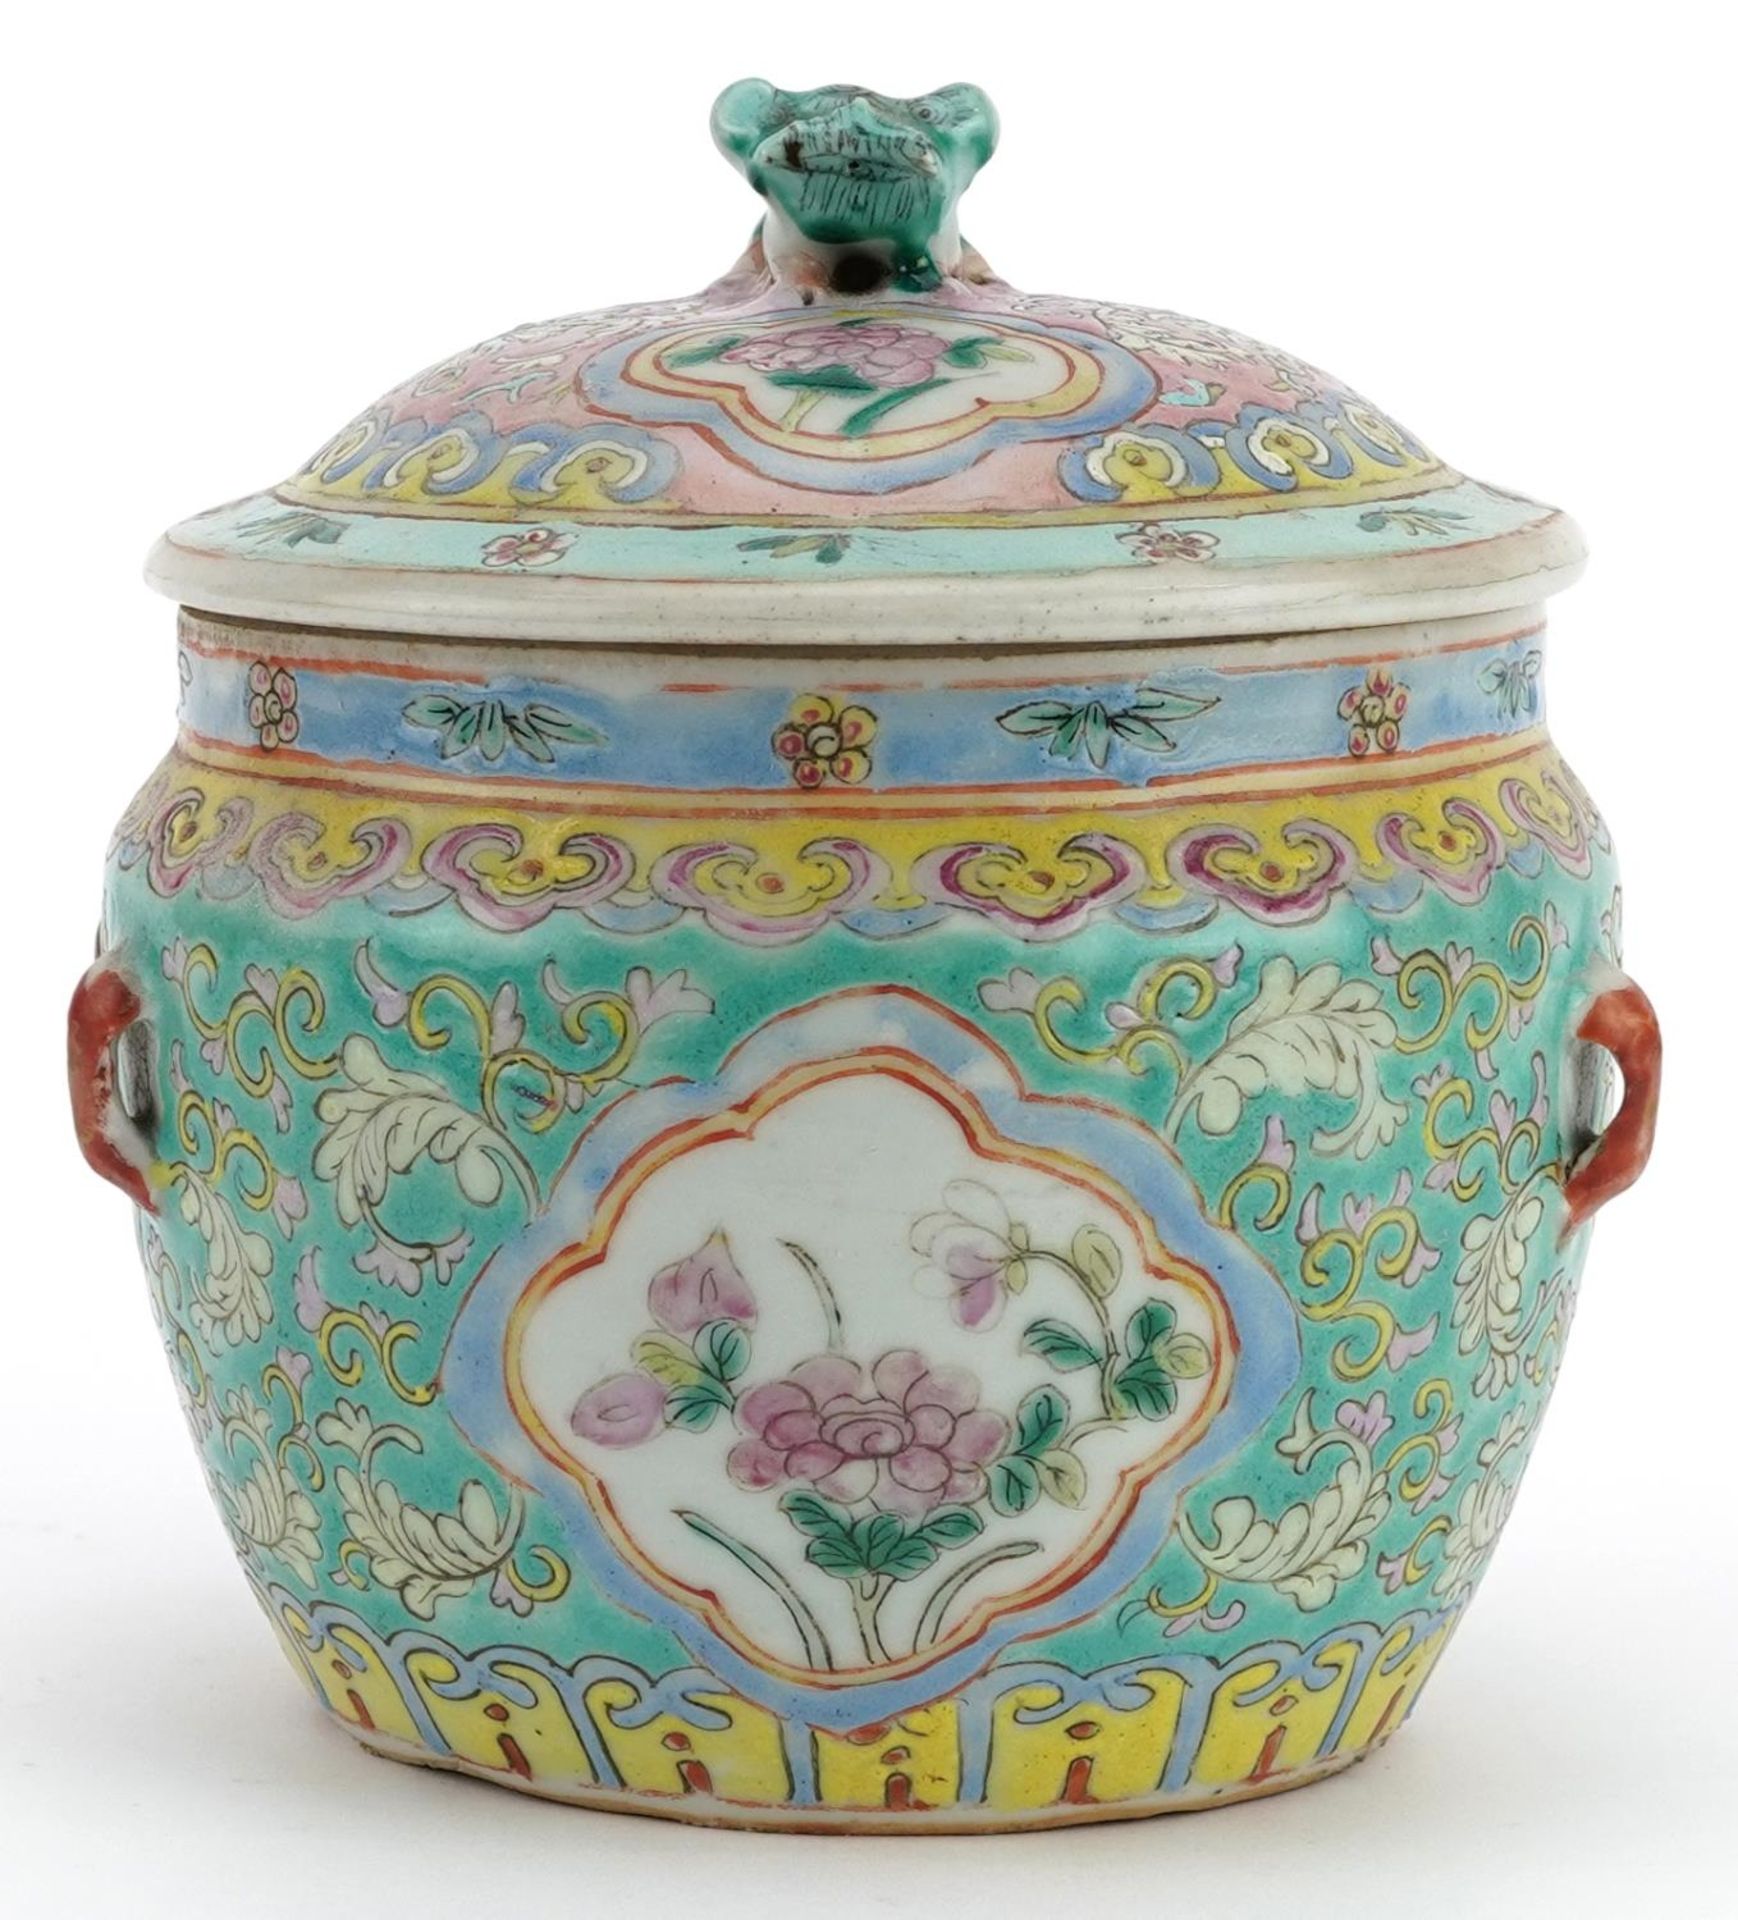 Chinese Peranakan Nyonya Straits porcelain kamcheng hand painted with flowers amongst scrolling